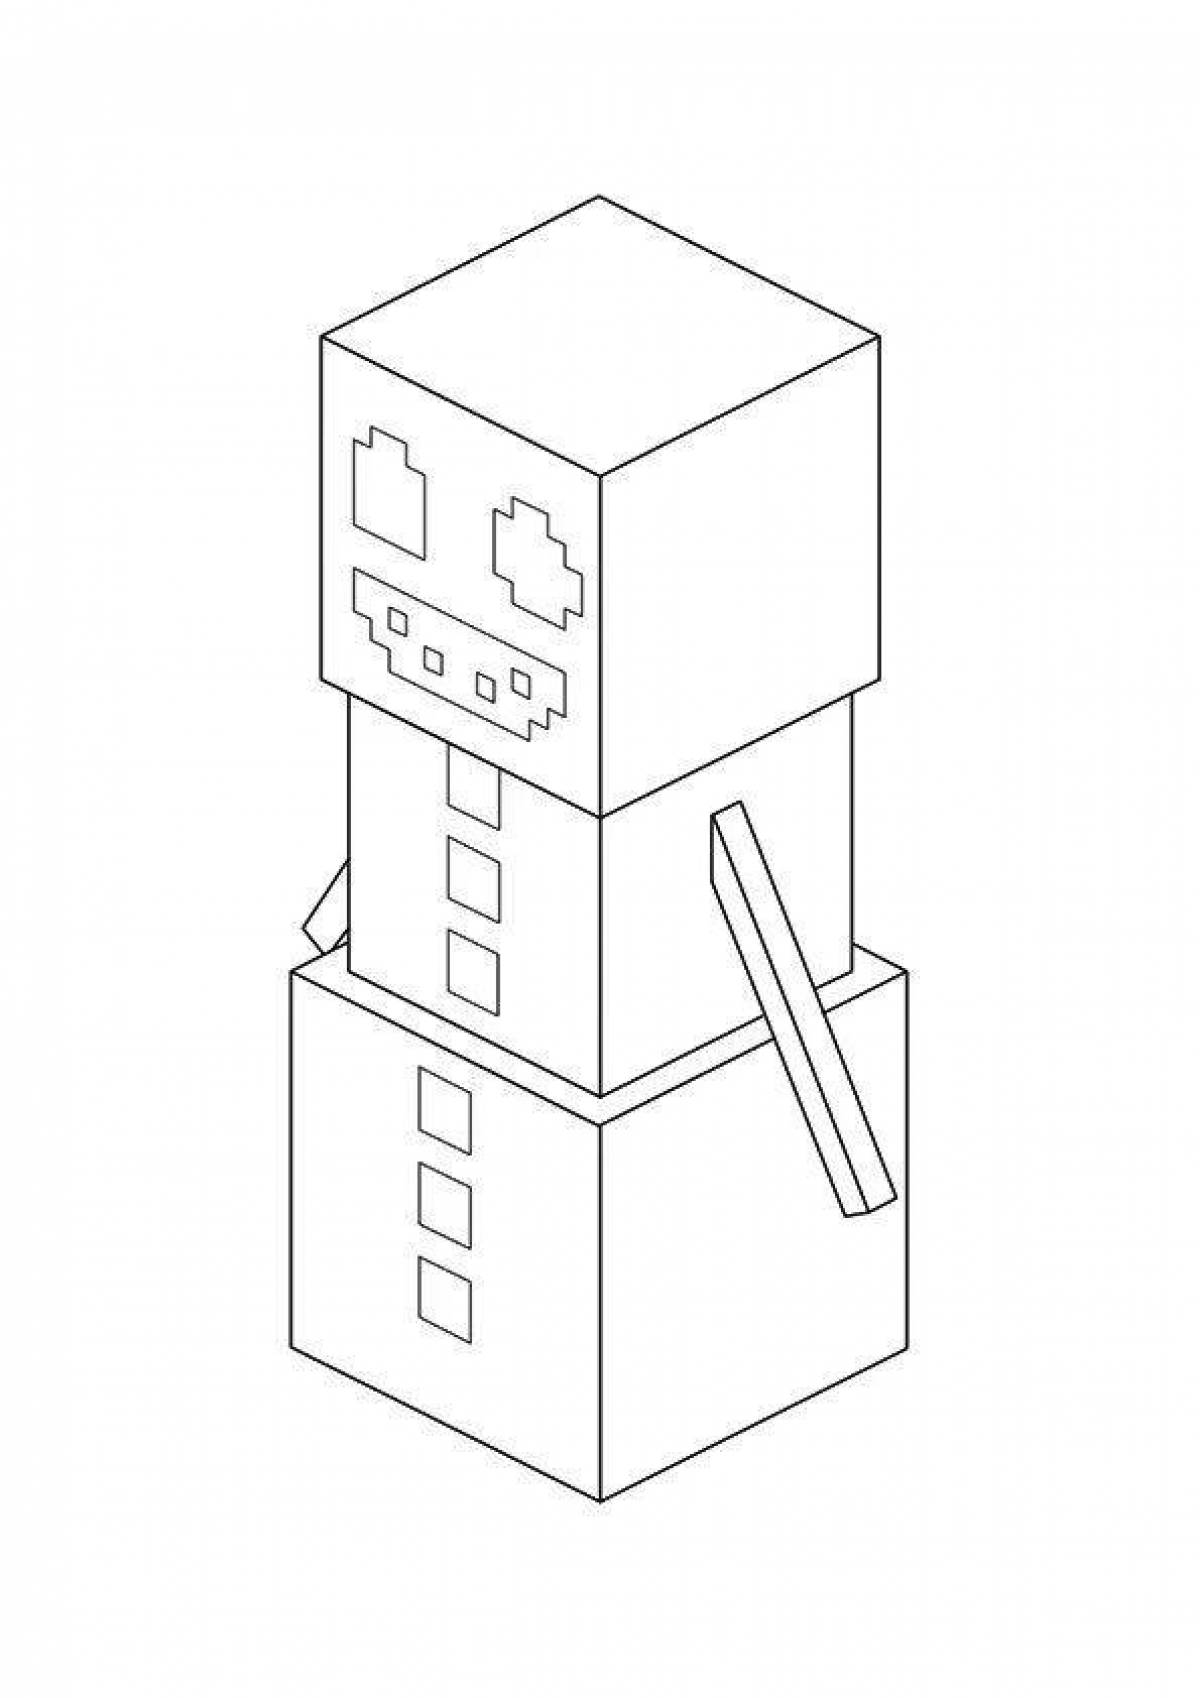 Adorable golem minecraft coloring page